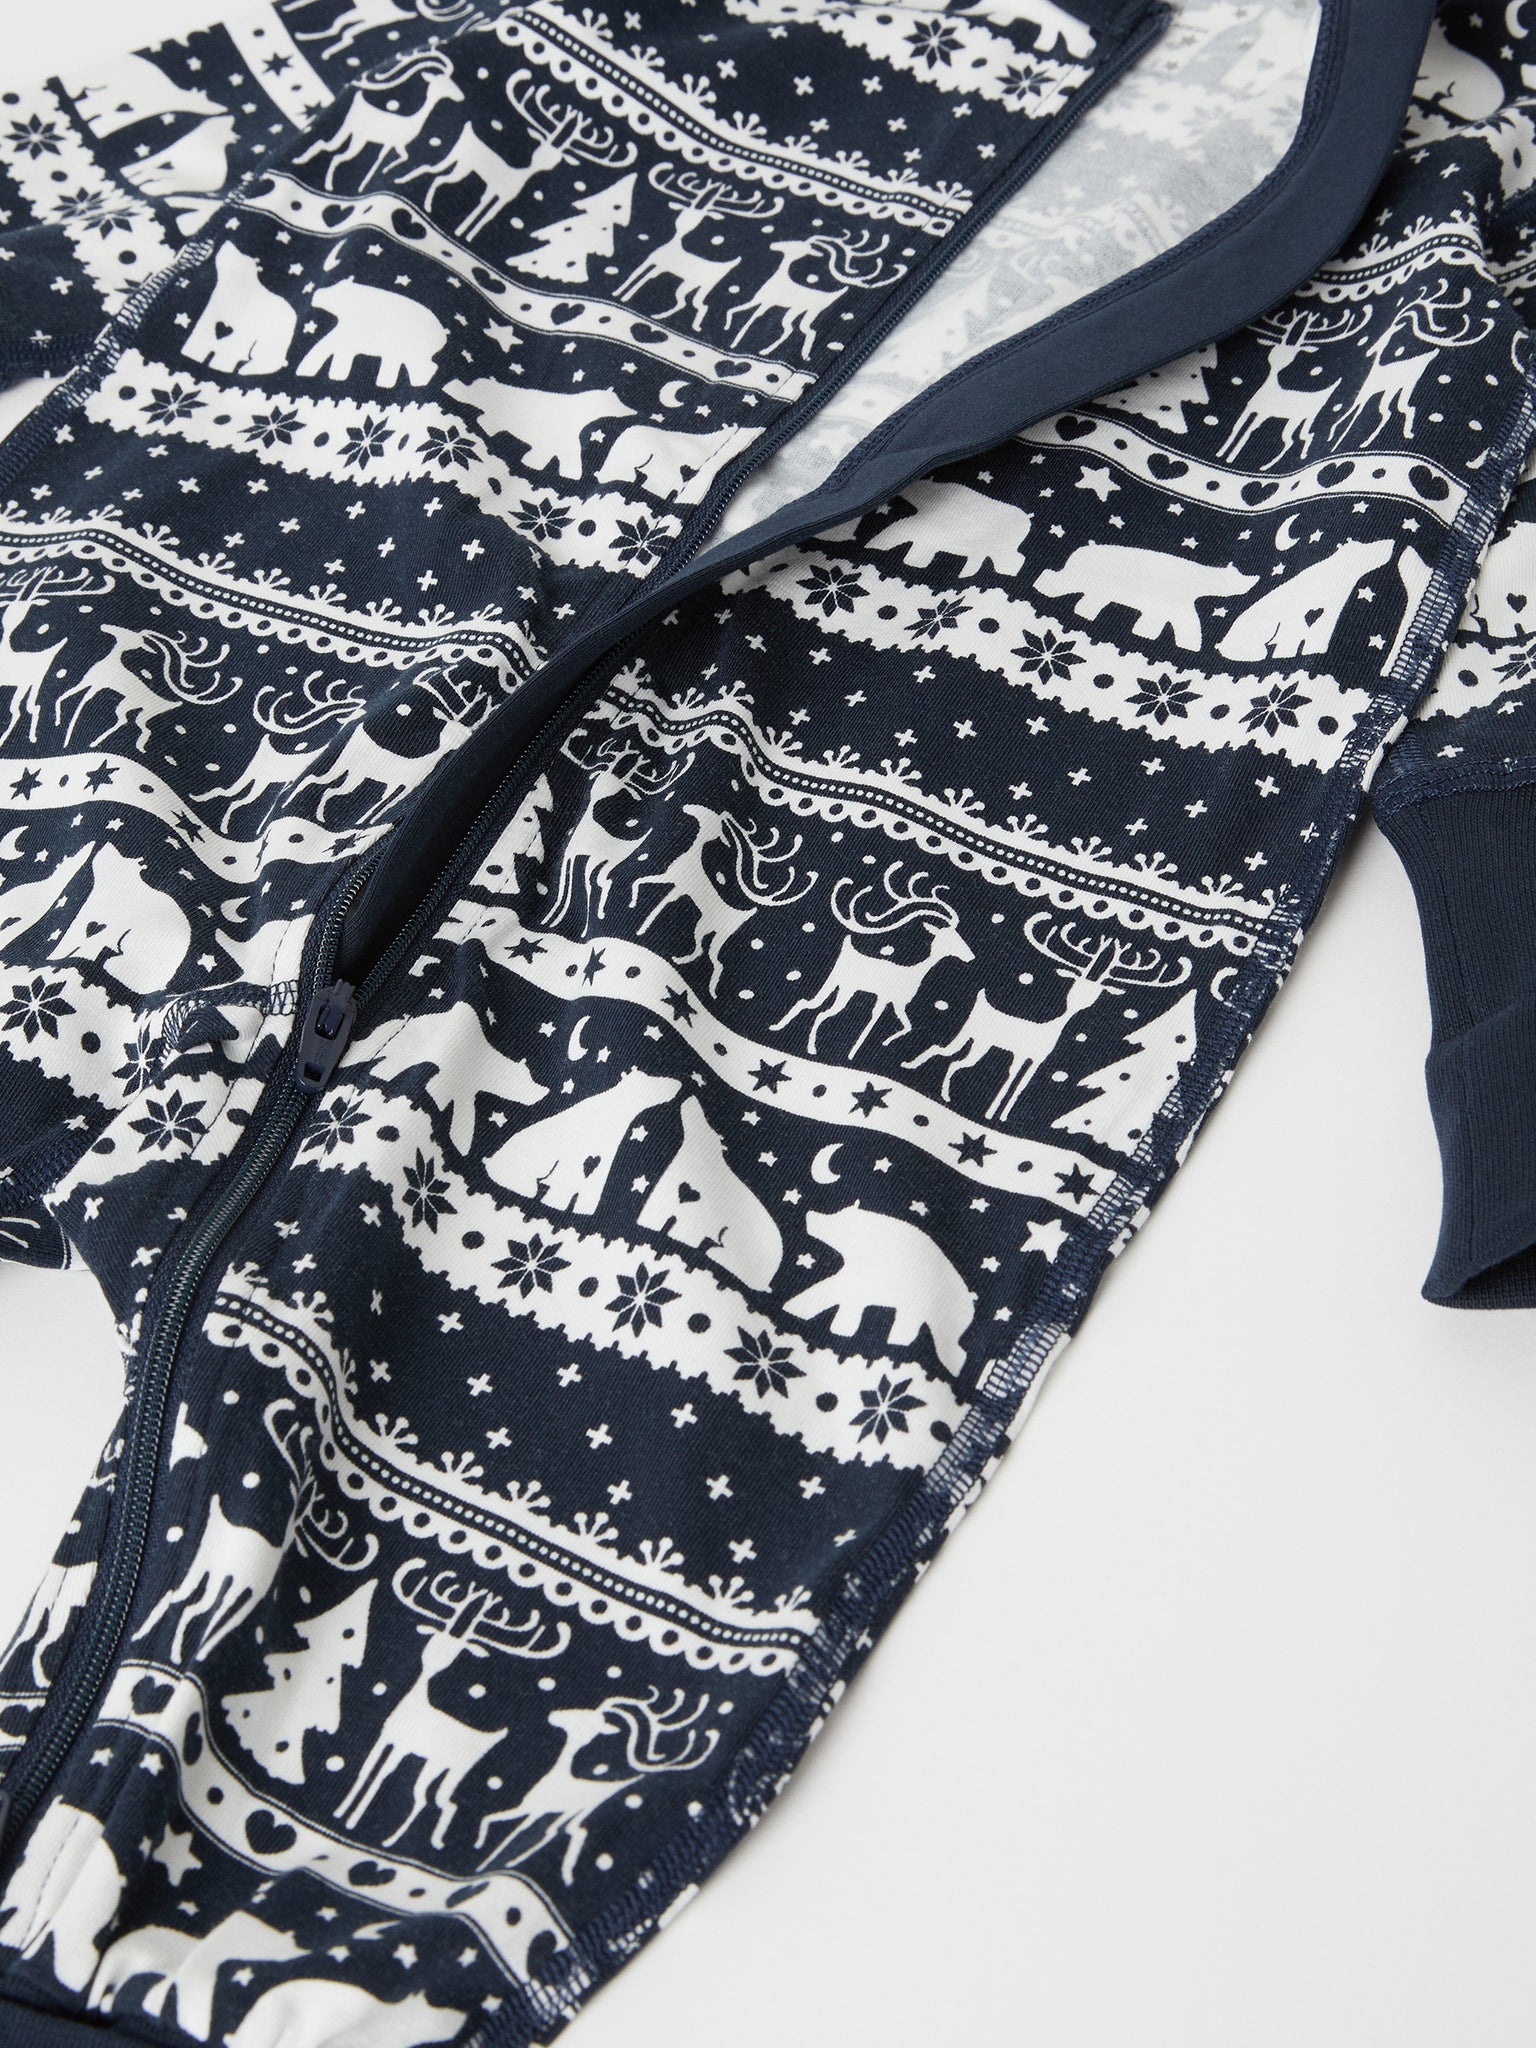 Reindeer Print Cotton Baby Sleepsuit from the Polarn O. Pyret baby collection. Nordic baby clothes made from sustainable sources.